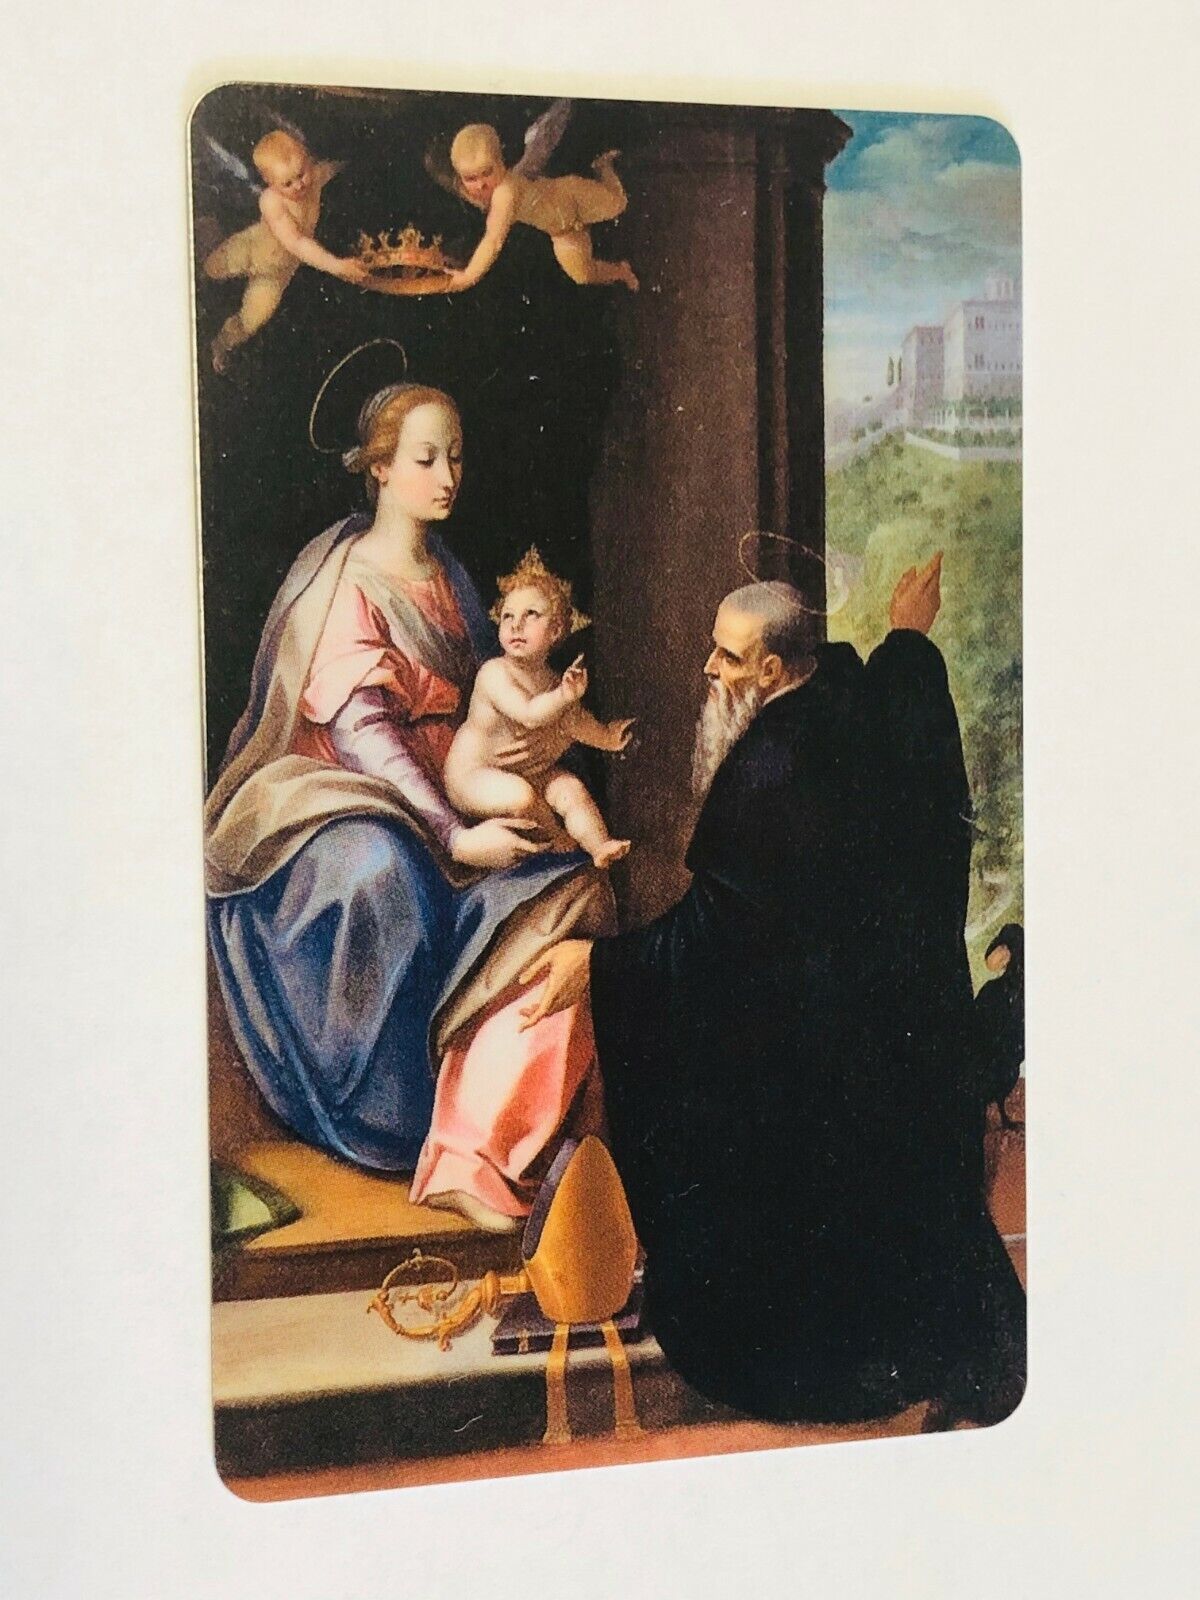 Saint Benedict Laminated Prayer Card, From Italy, New #5 - Bob and Penny Lord